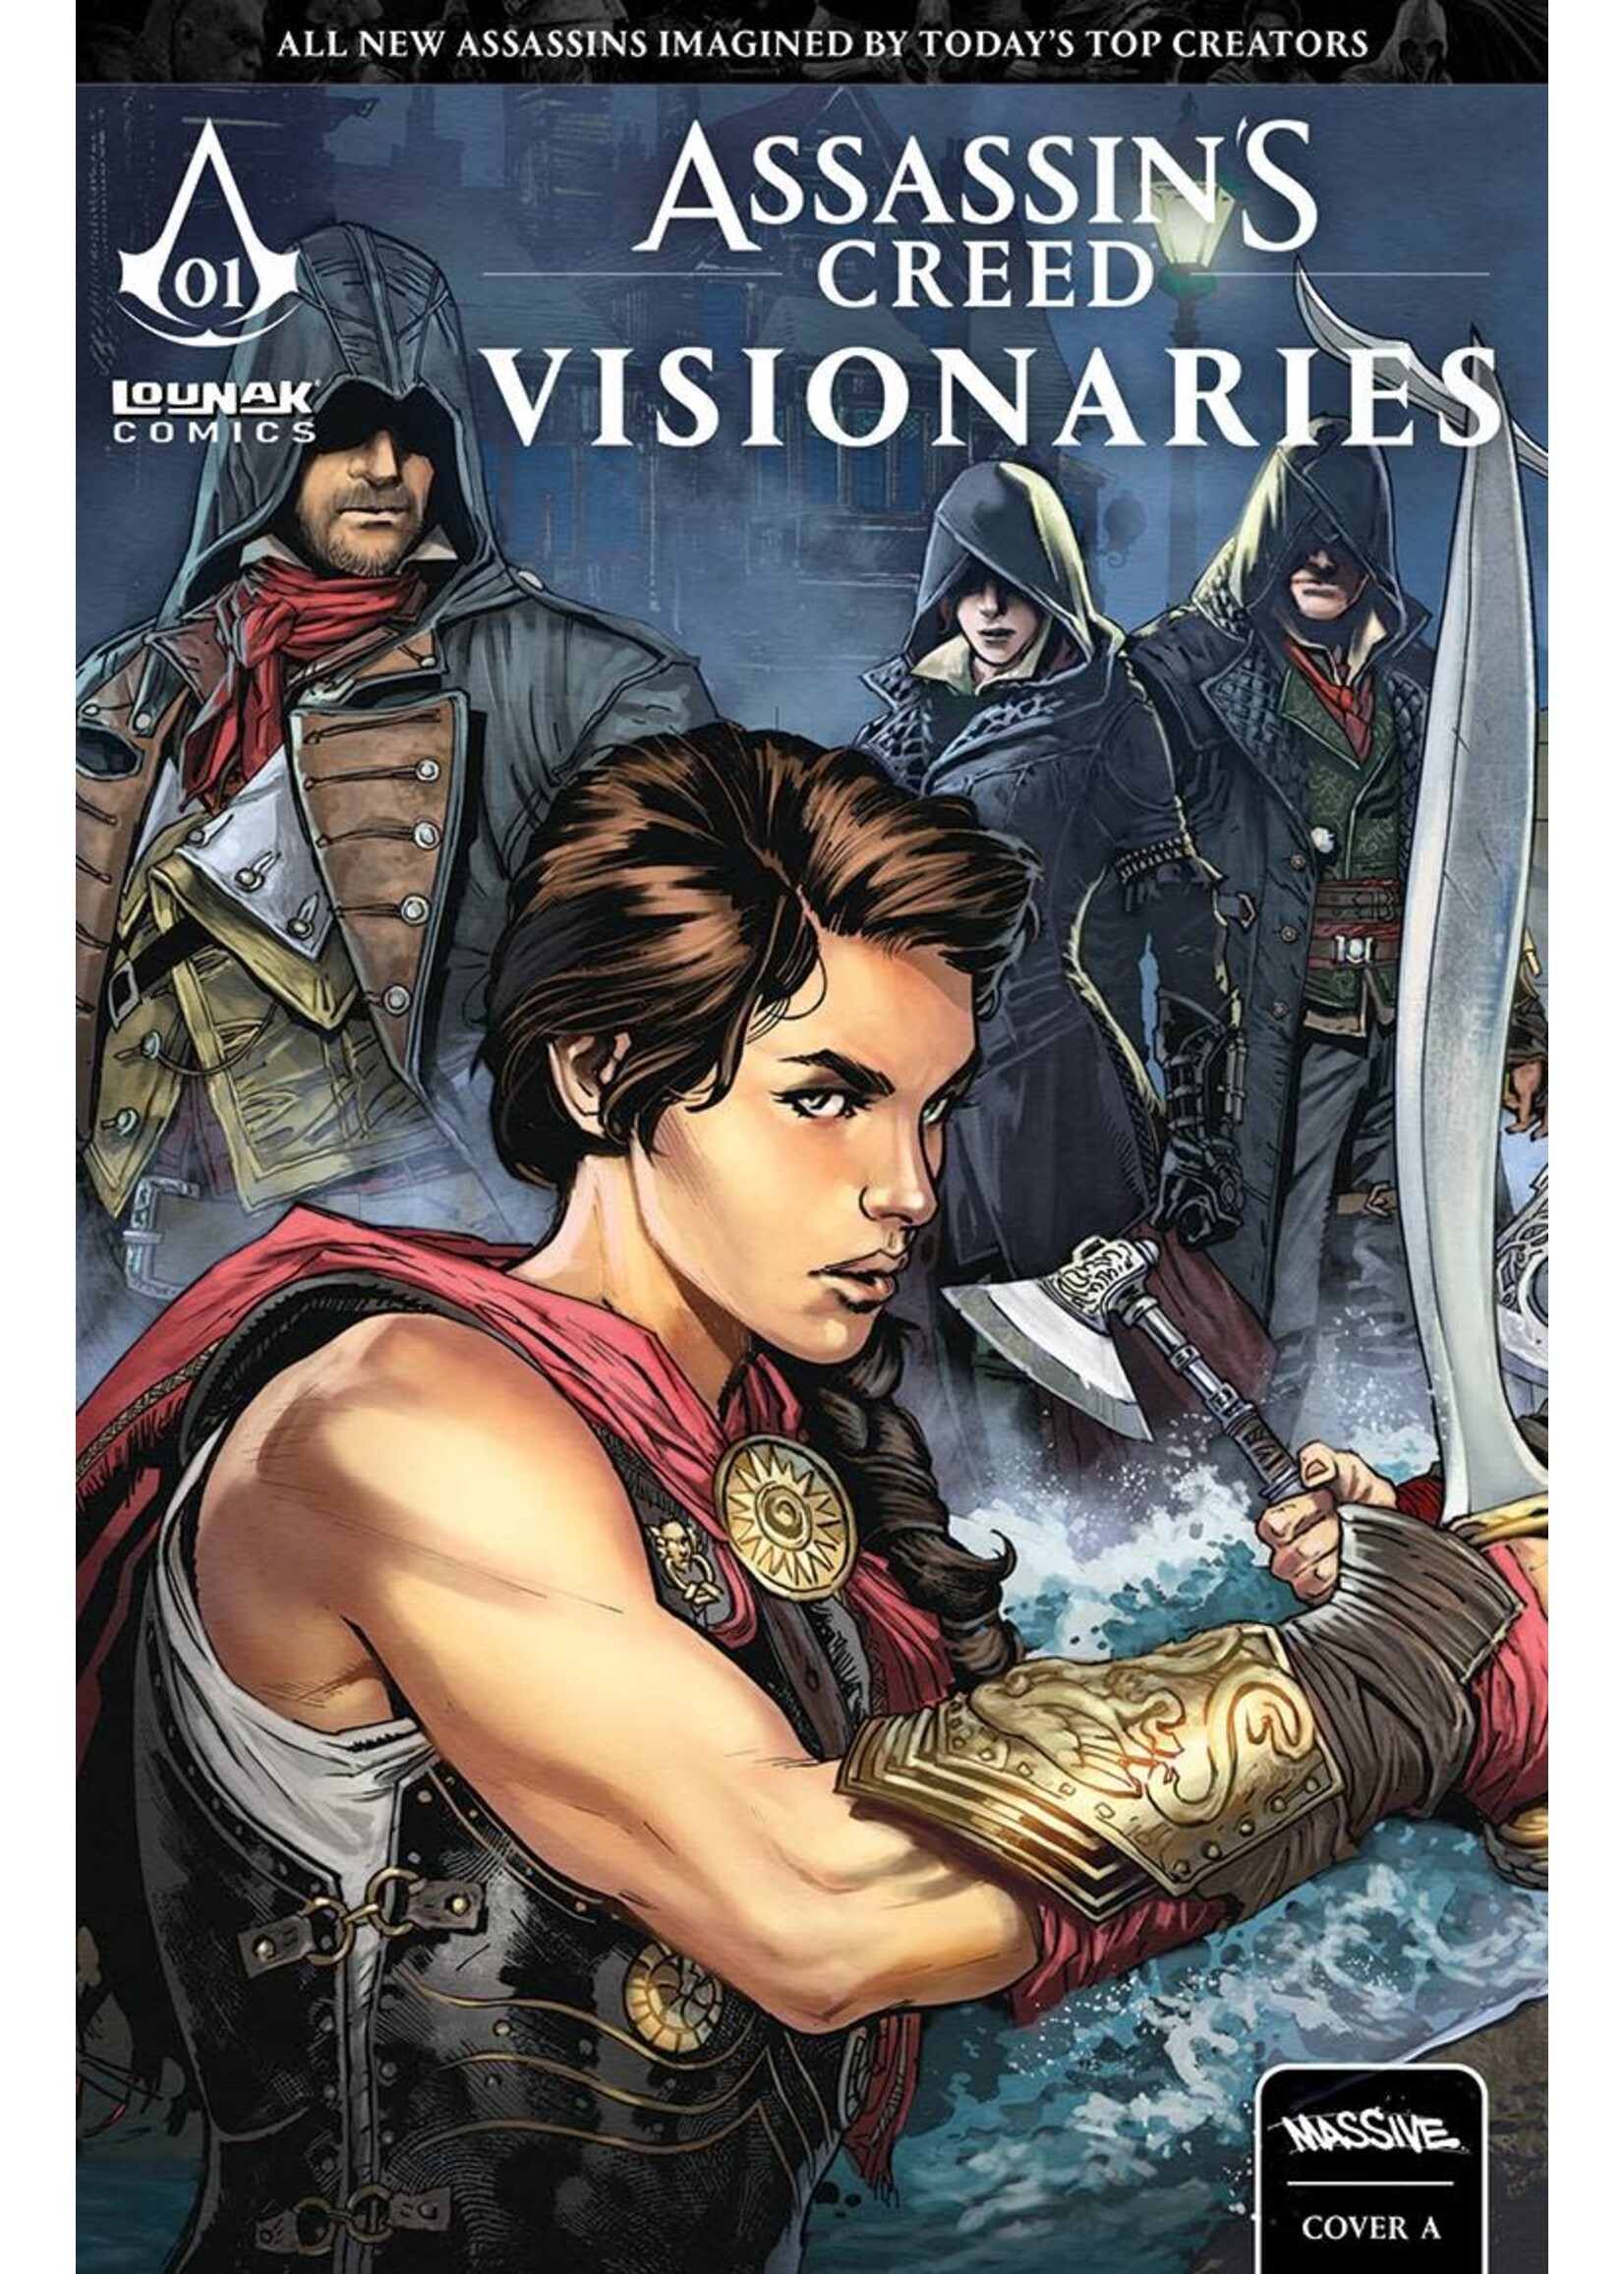 MASSIVE ASSASSINS CREED VISIONARIES #1 (OF 4) CVR A CONNECTING (MR)